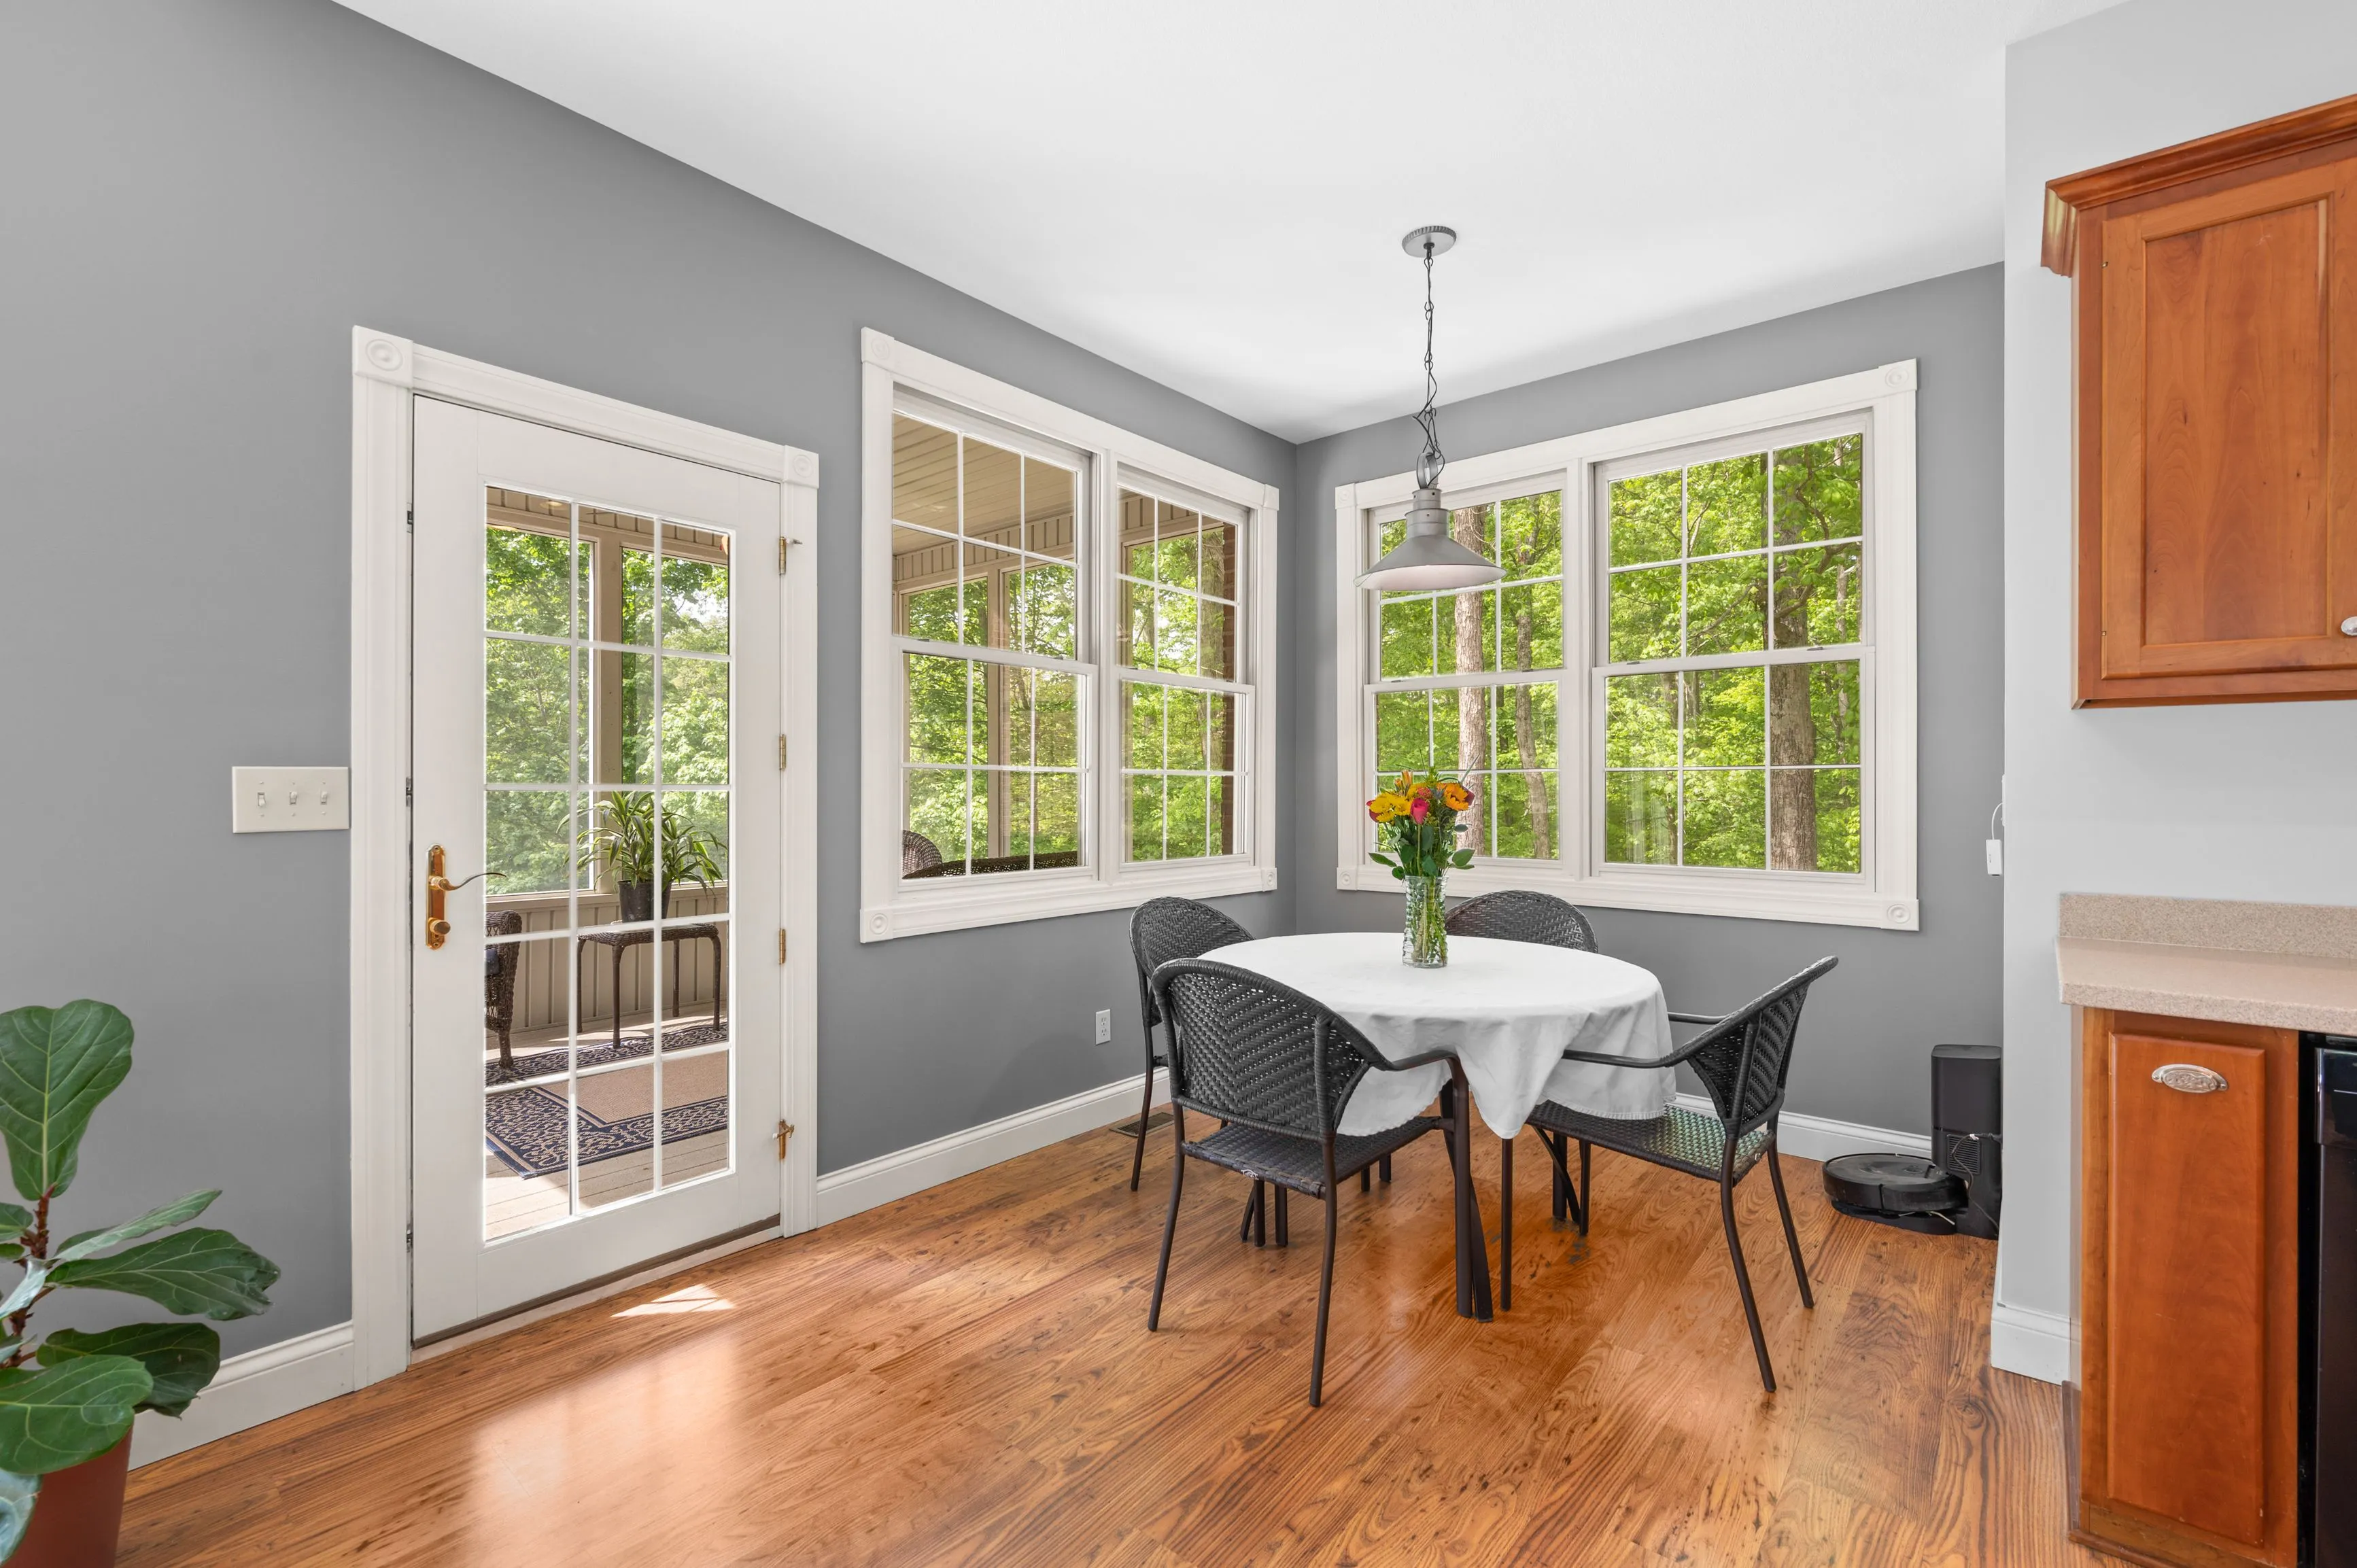 Bright dining area with hardwood floors, a round table with chairs, large windows with a view of trees, and French doors leading to a deck.